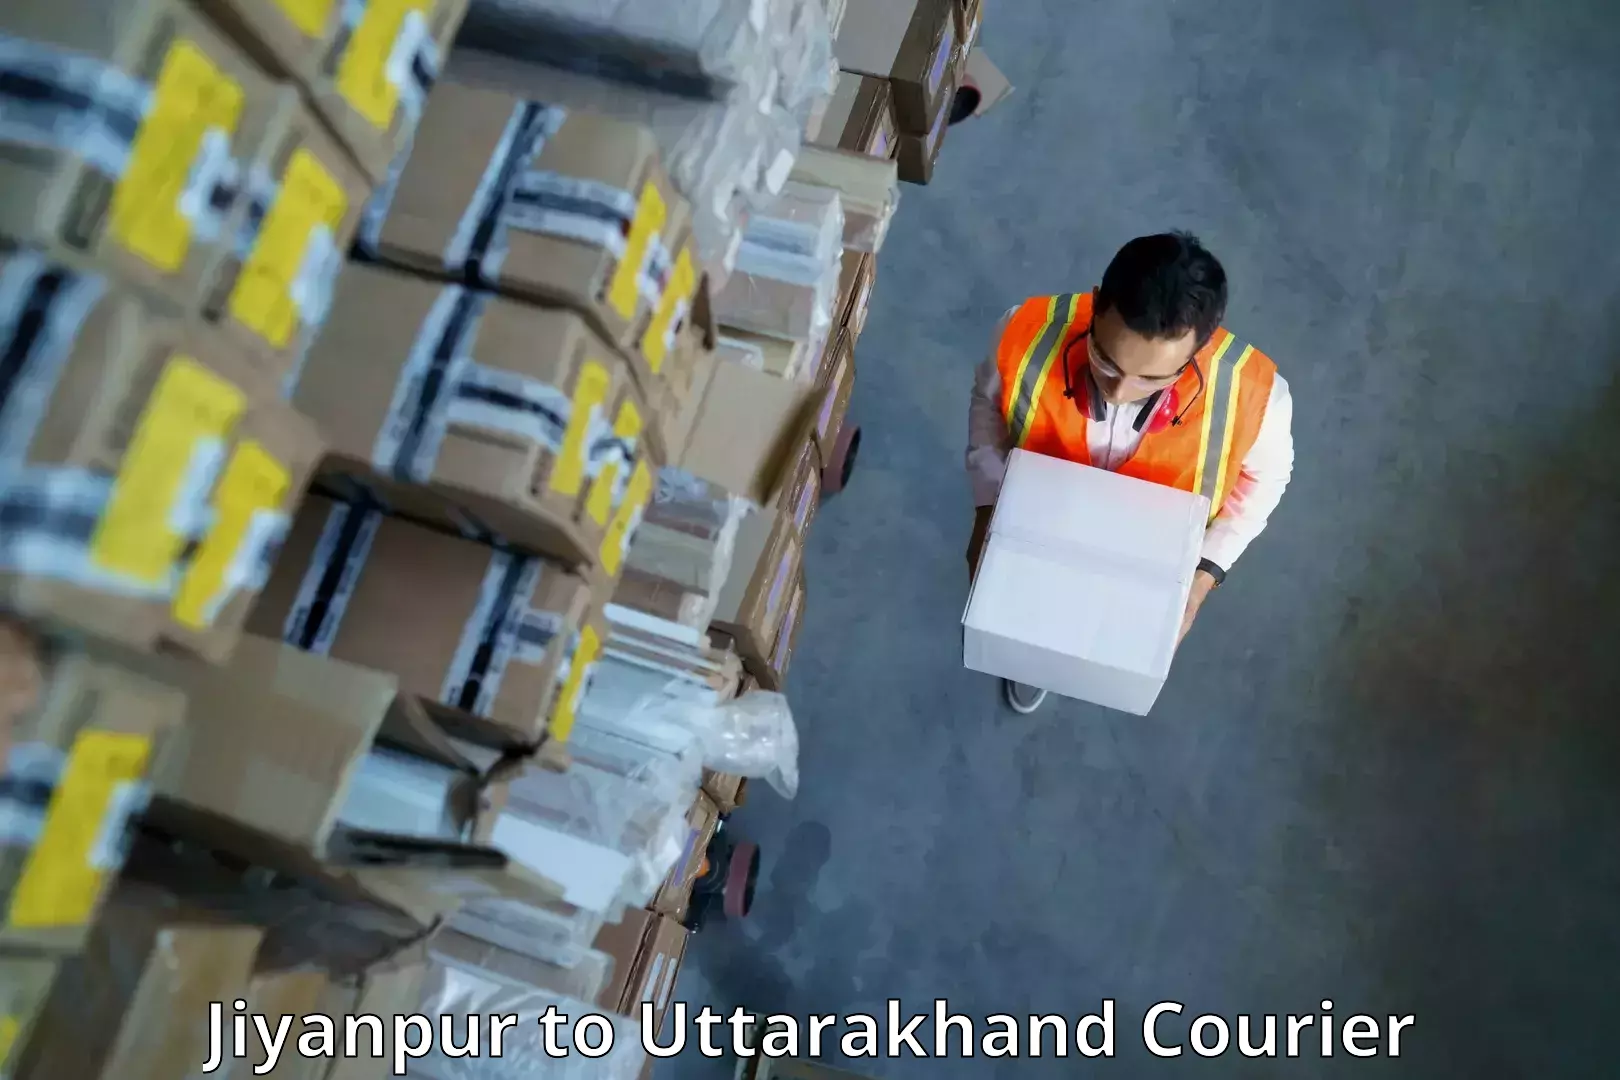 Parcel service for businesses Jiyanpur to IIT Roorkee